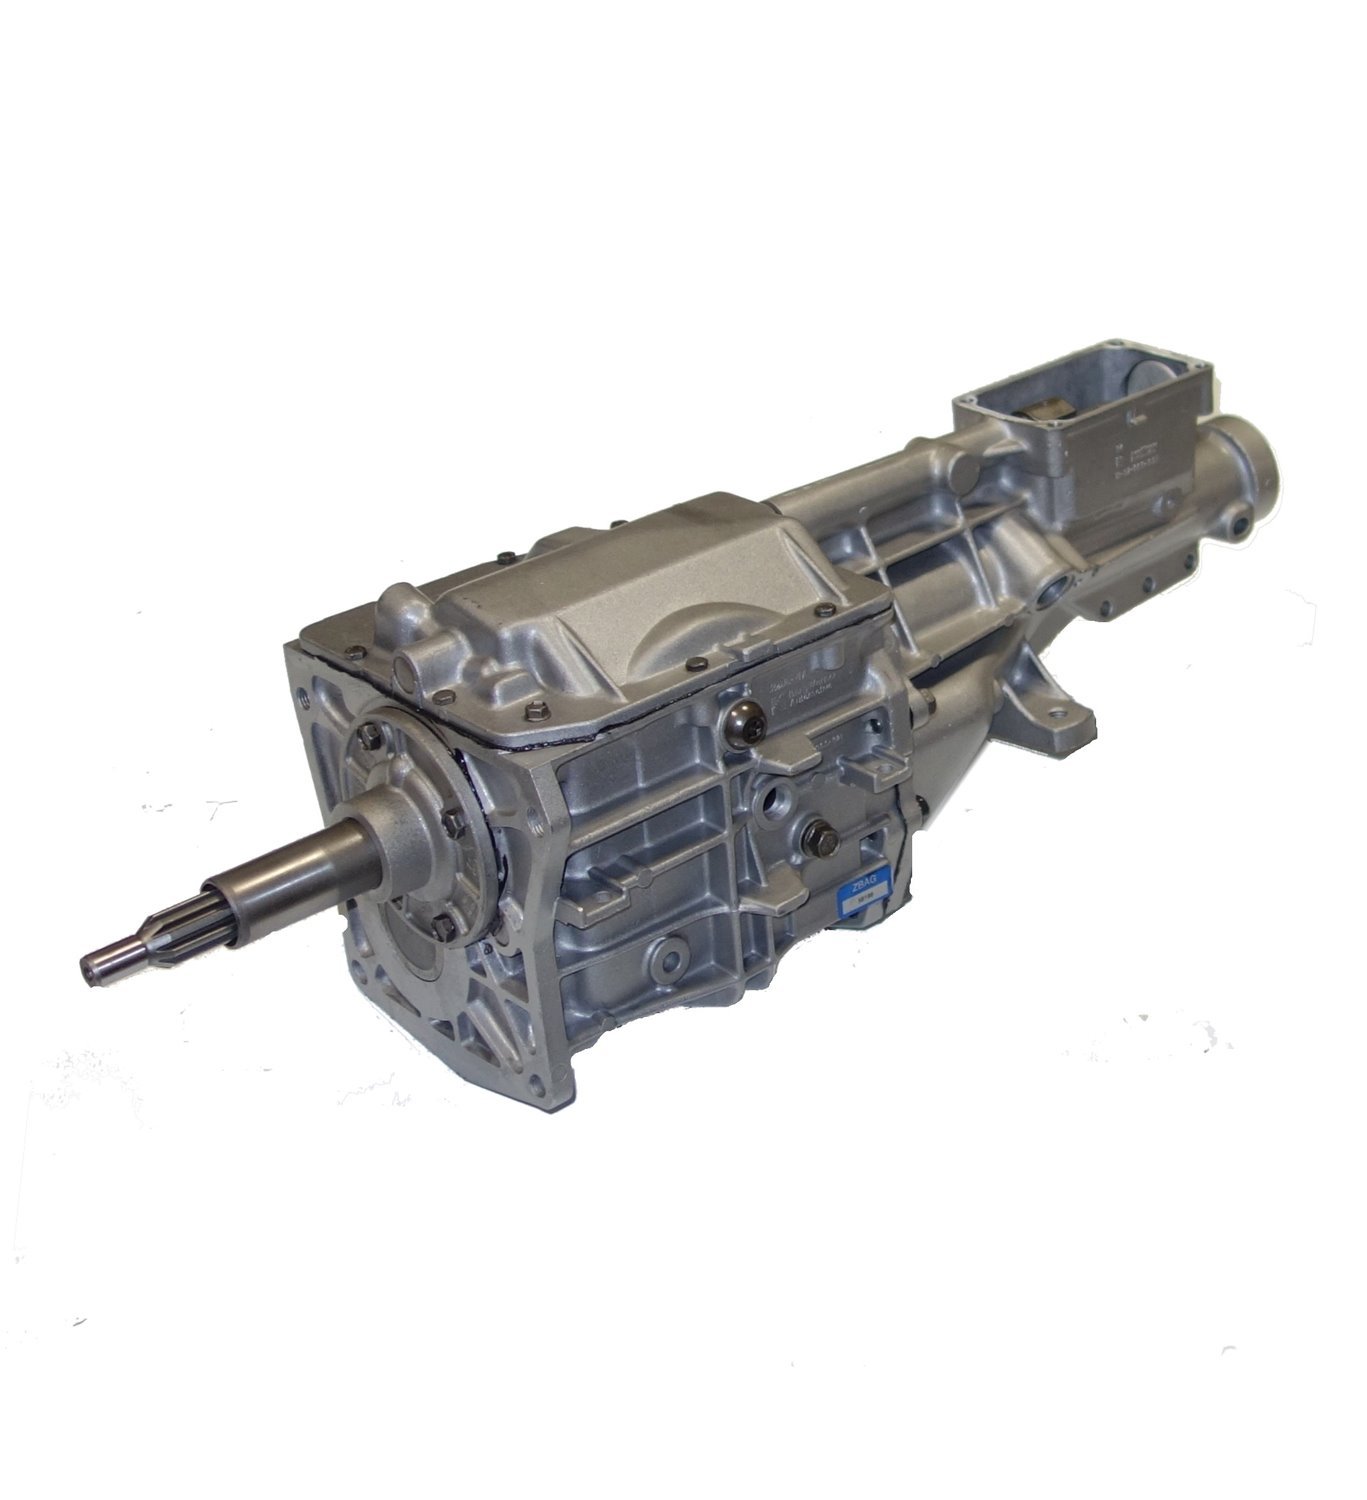 Remanufactured T5 Manual Transmission for Ford 83-84 Mustang, 5 Speed